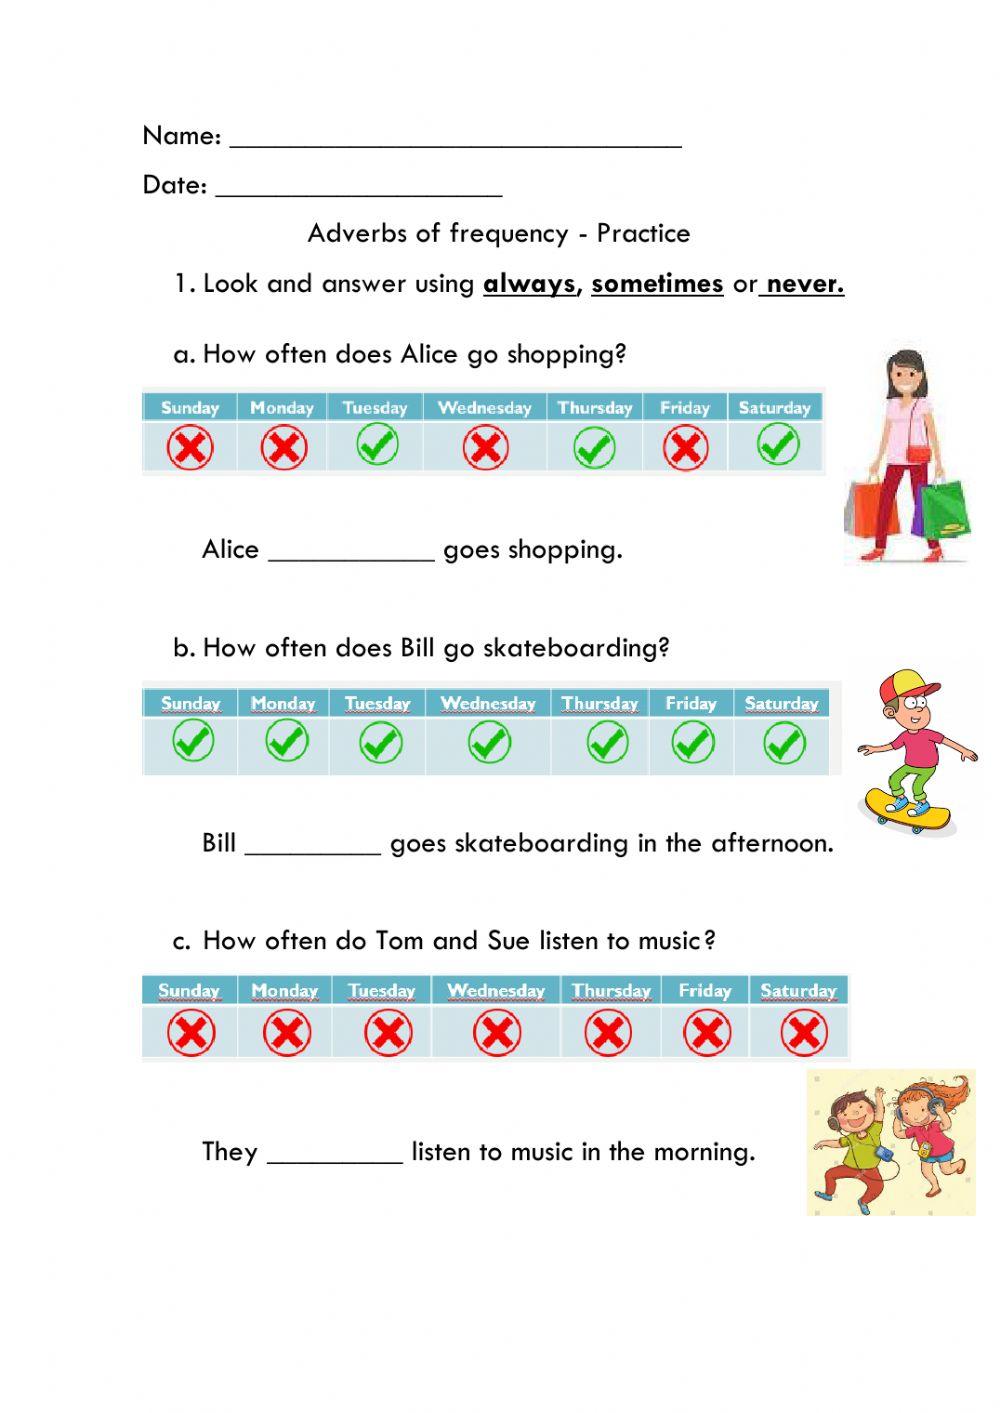 Adverbs of frequency - Practice